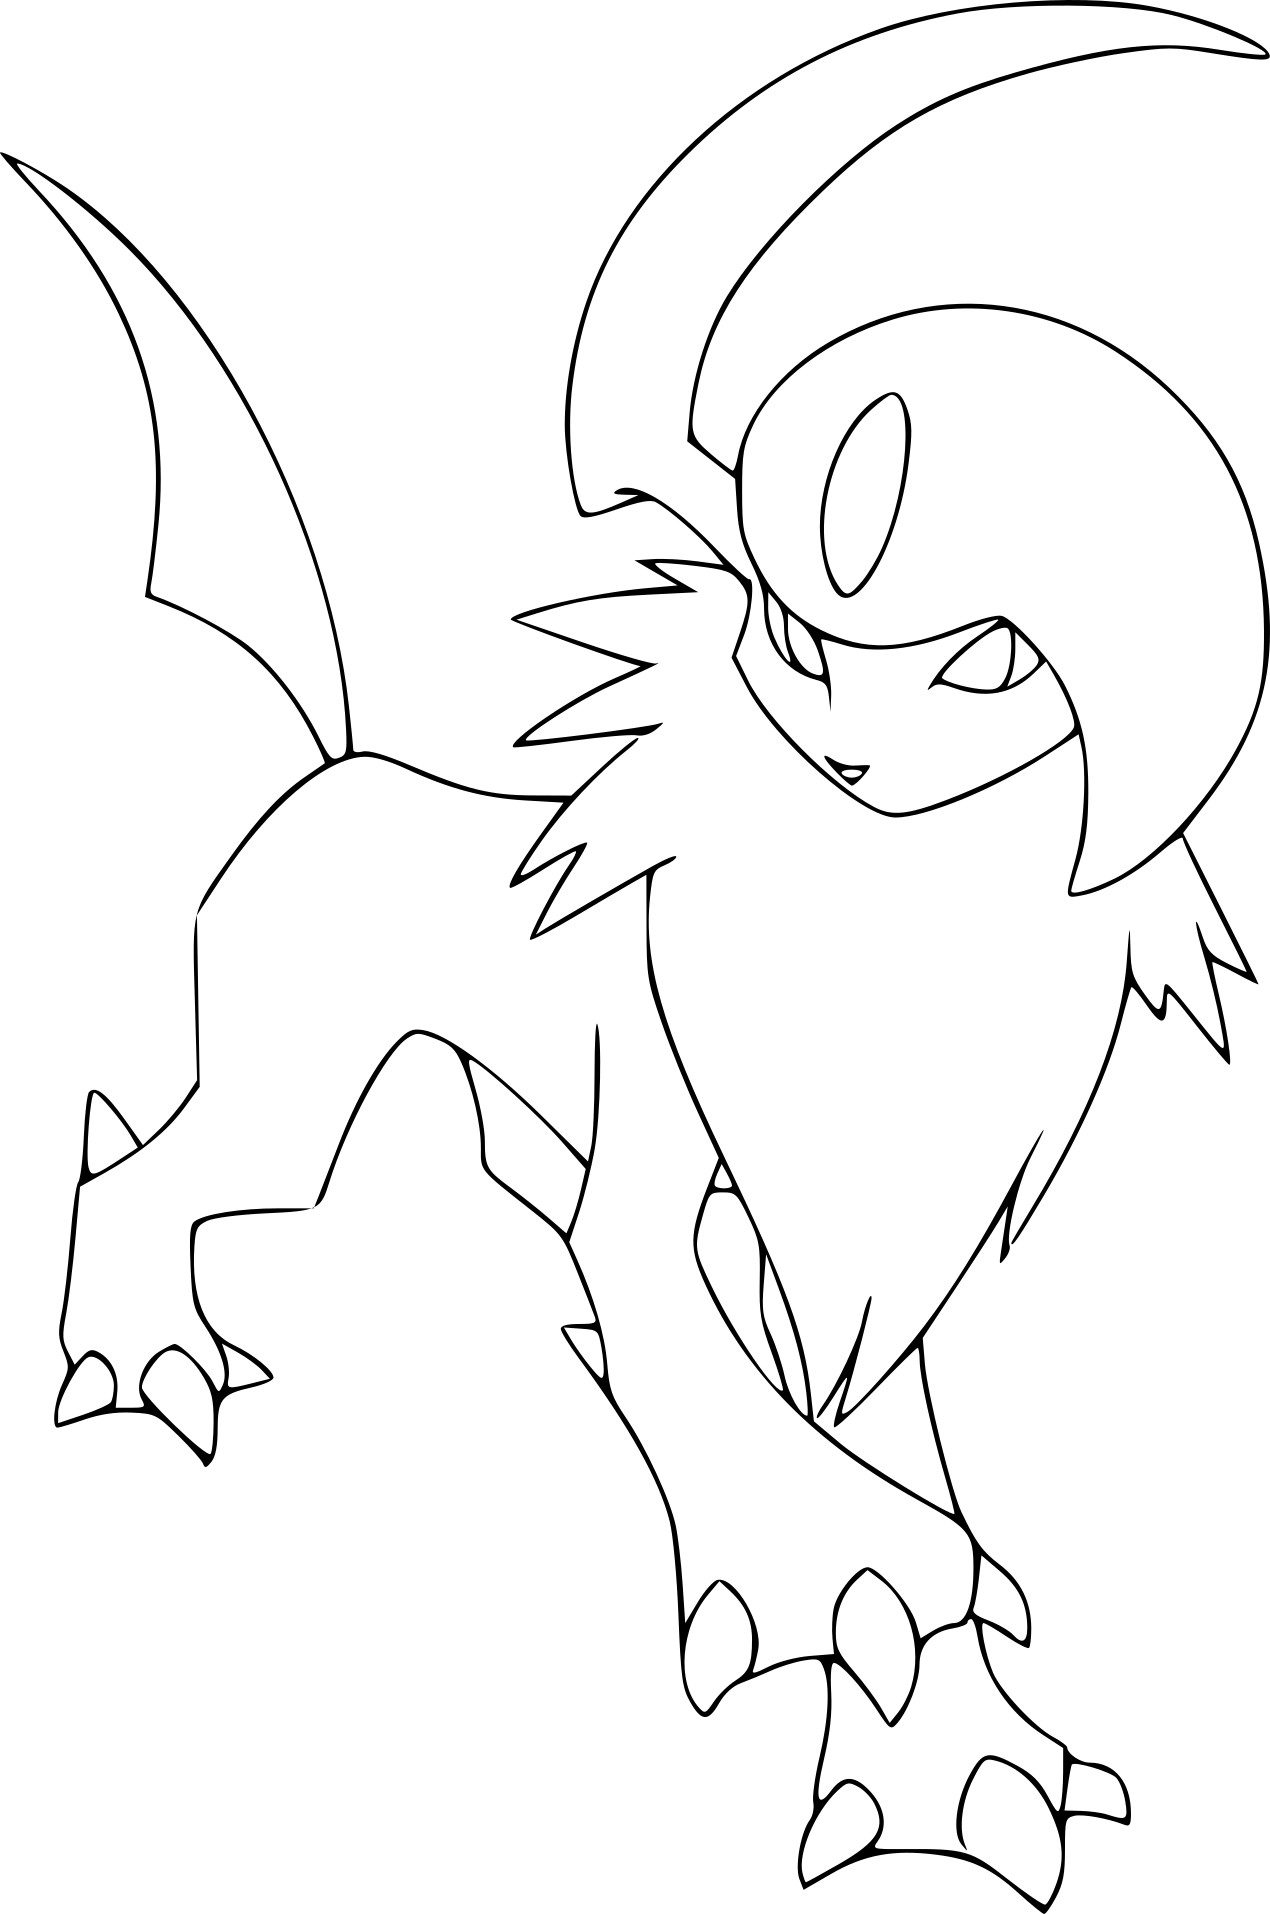 coloriageabsol